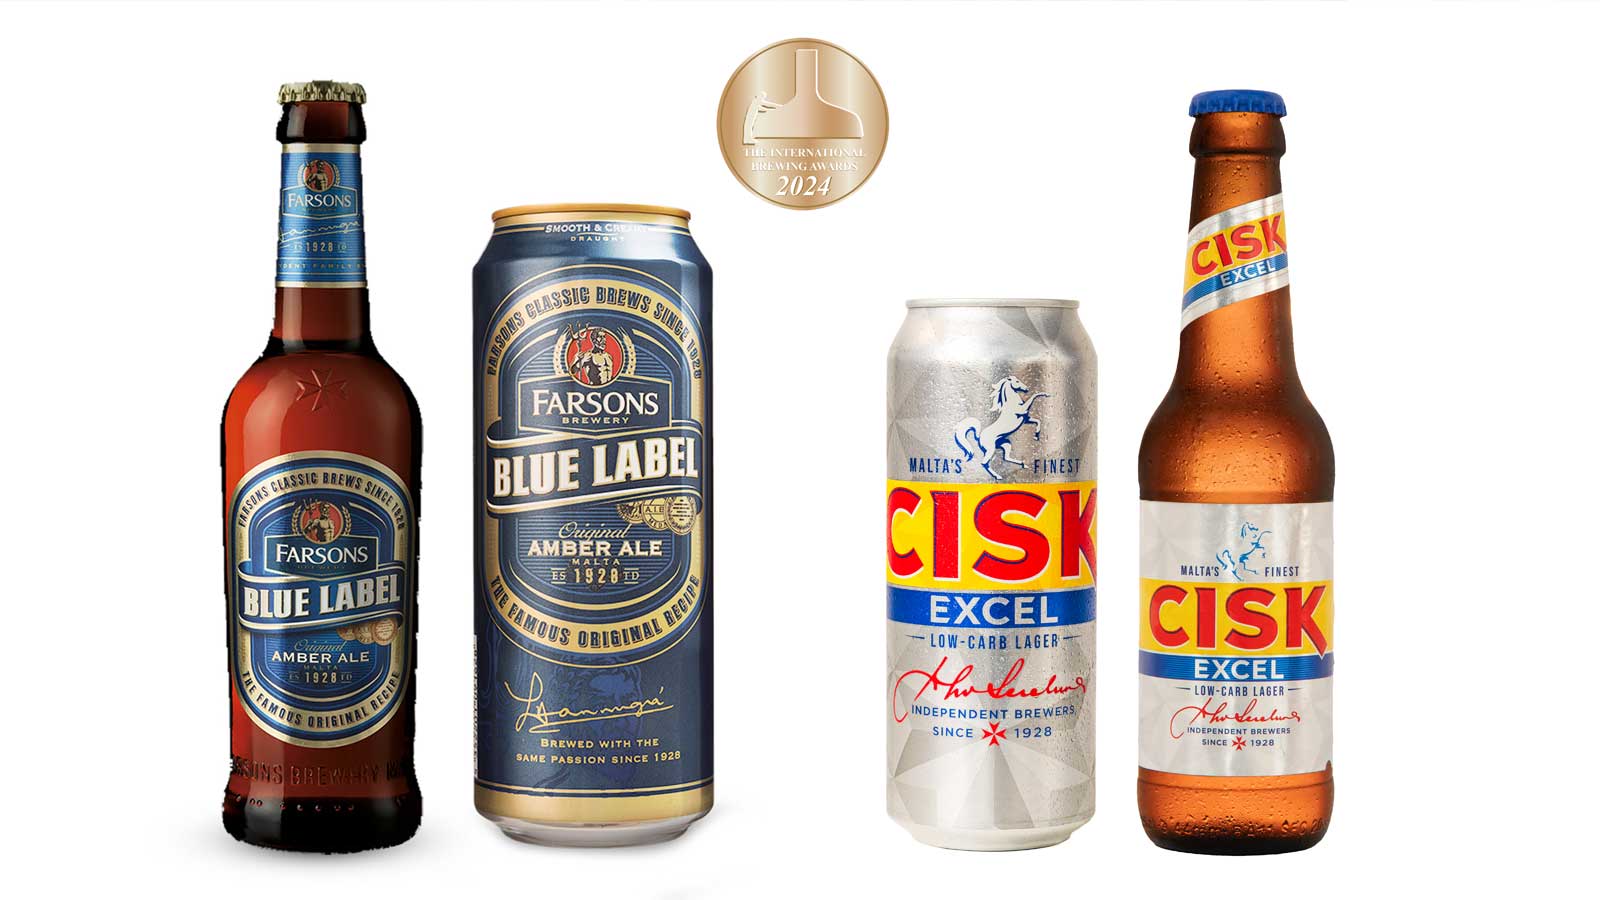 Farsons beers win again at ‘Oscars of the brewing industry’ 